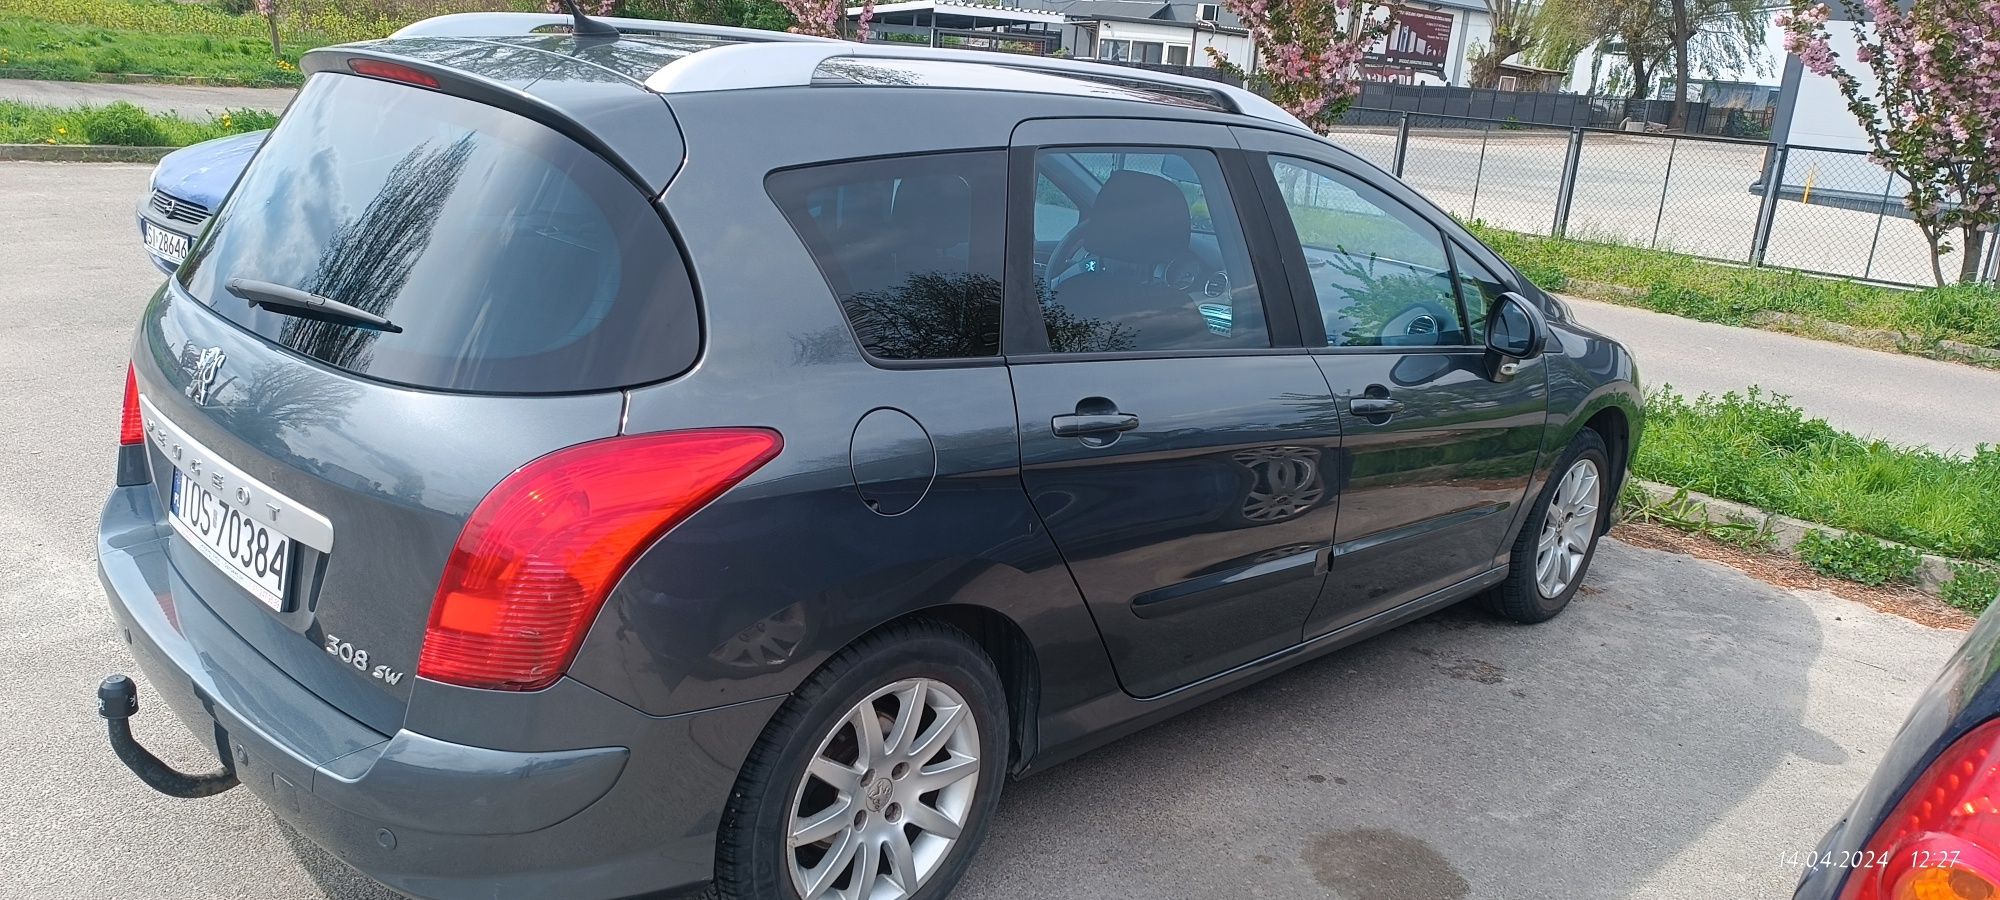 Peugeot 308 SW 1.6 benzyna